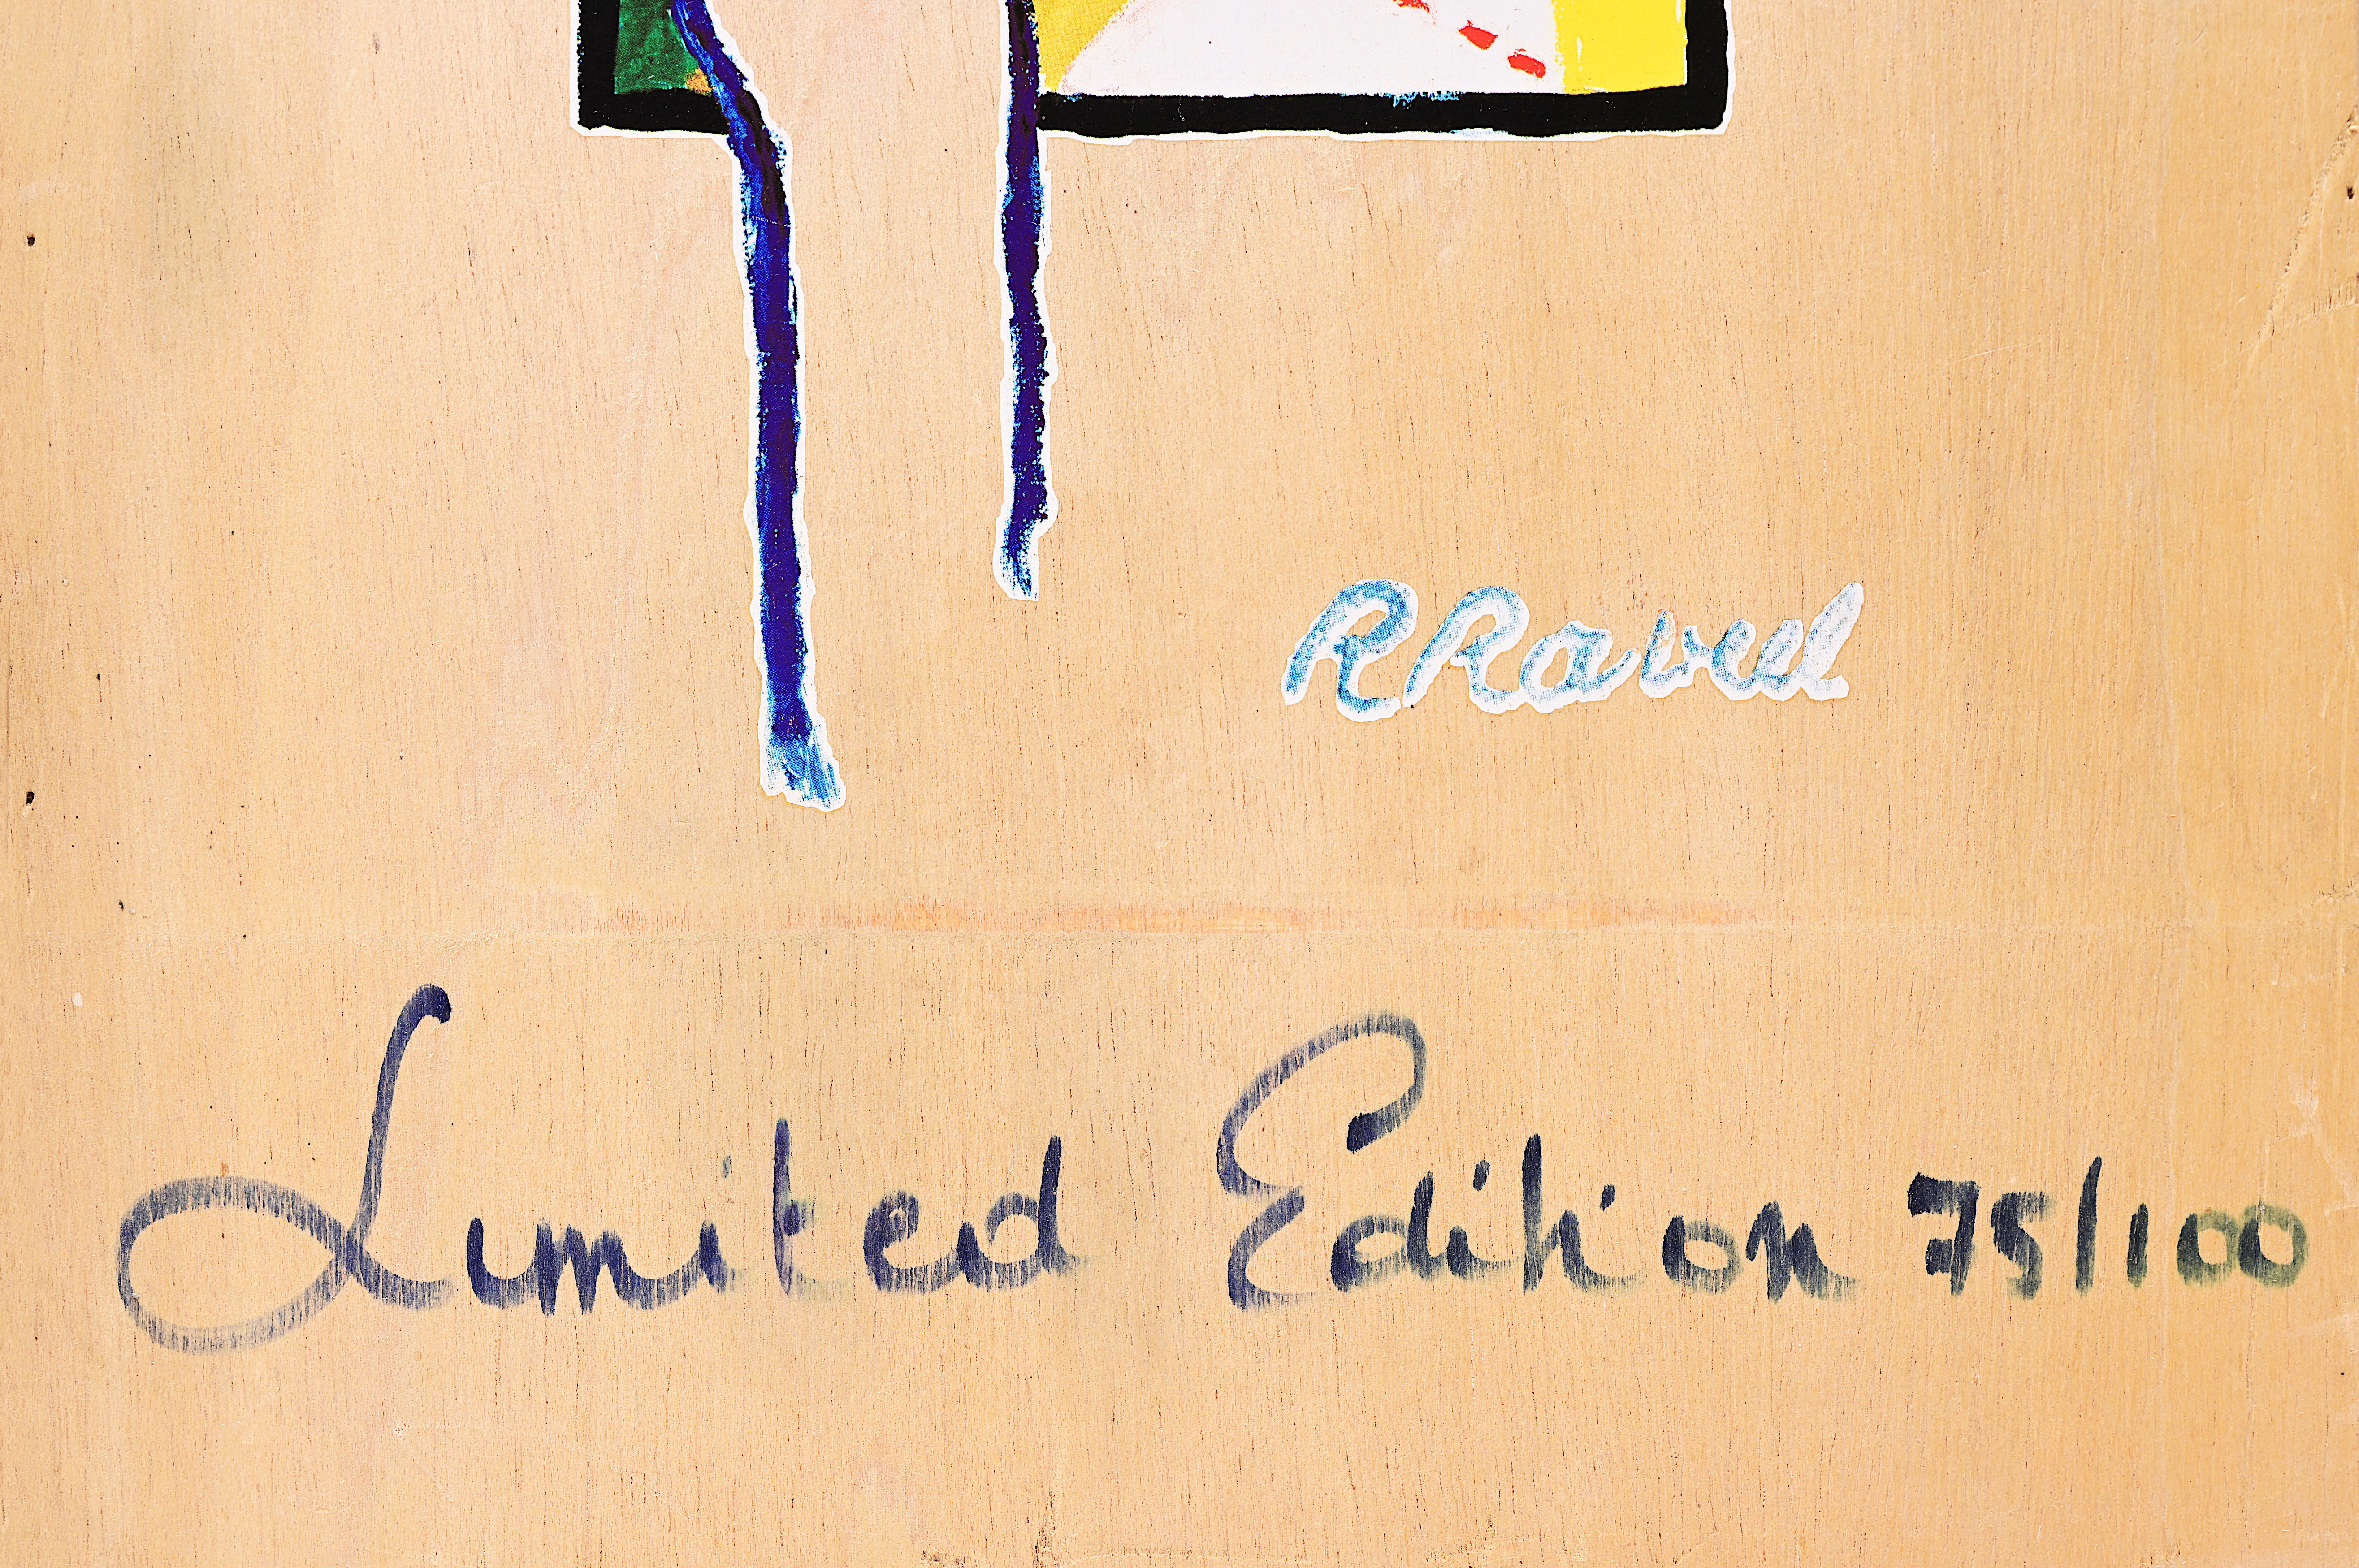 Roger Raveel (1921-2013): Two boxes of wine (eight bottles), ed. 43/100 and 75/100, and a publicatio - Image 4 of 10